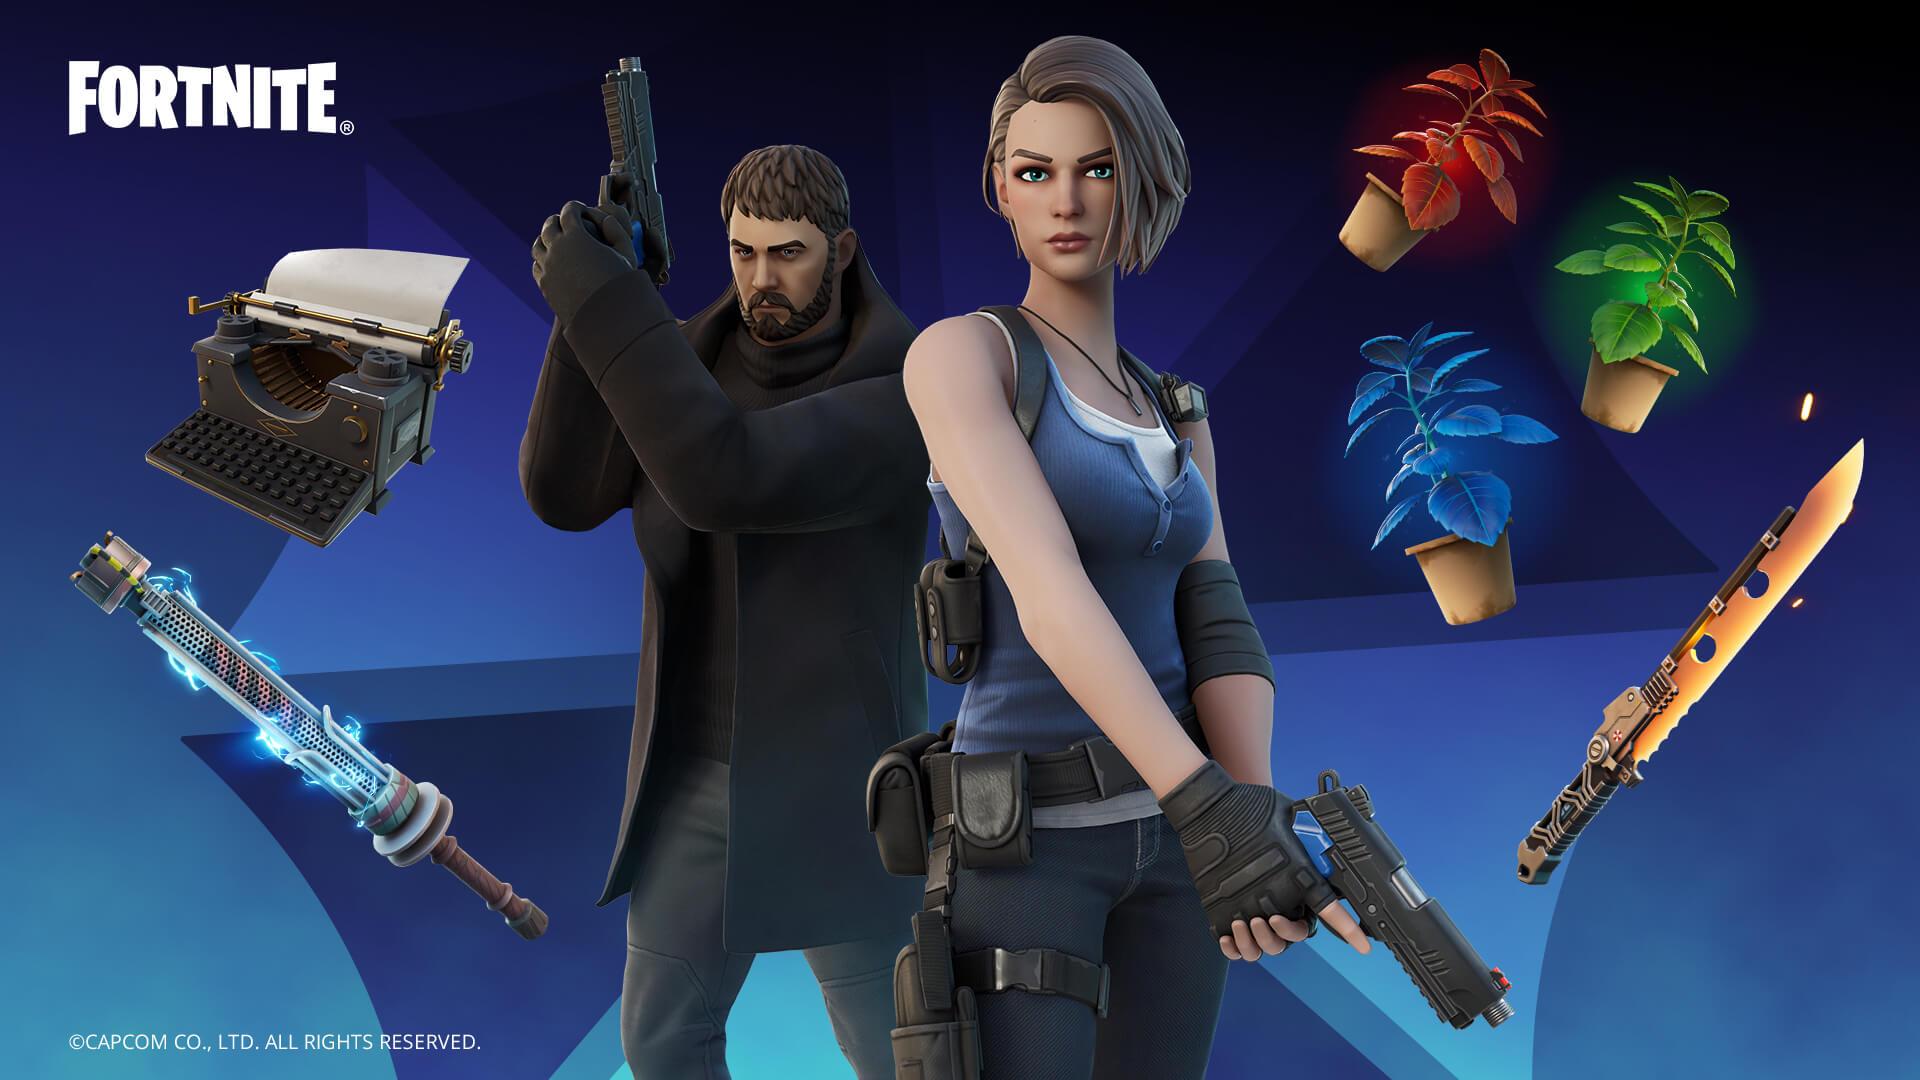 Fortnite S.T.A.R.S. Team Set Chris Redfield and Jill Valentine